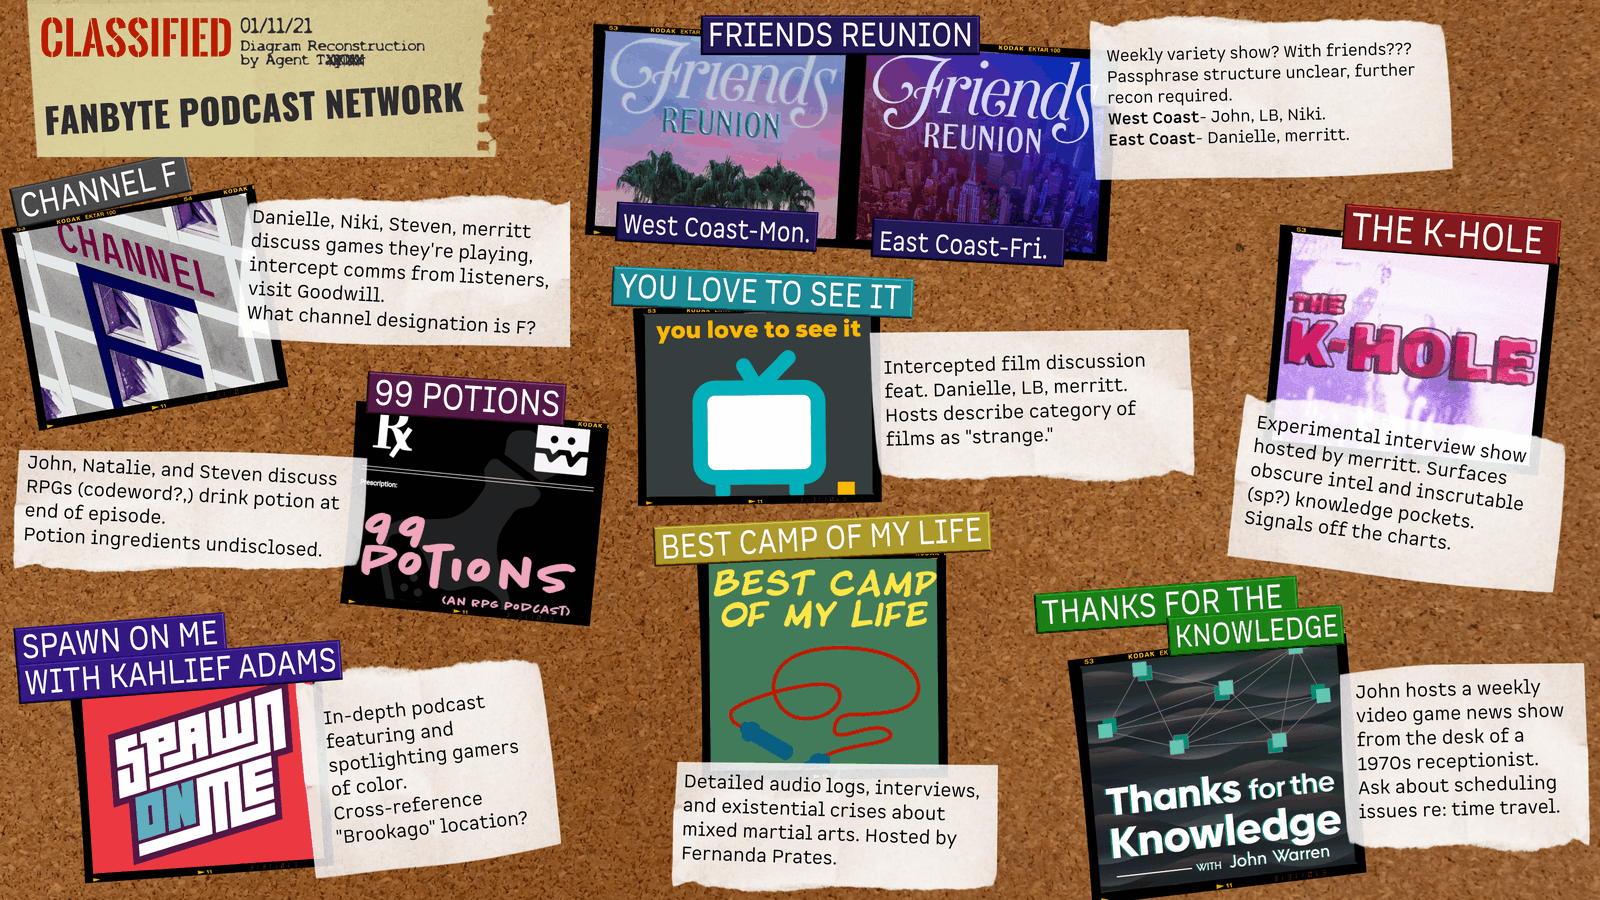 2021 infographic for the Fanbyte podcast network, styled like a conspiracy theory corkboard.